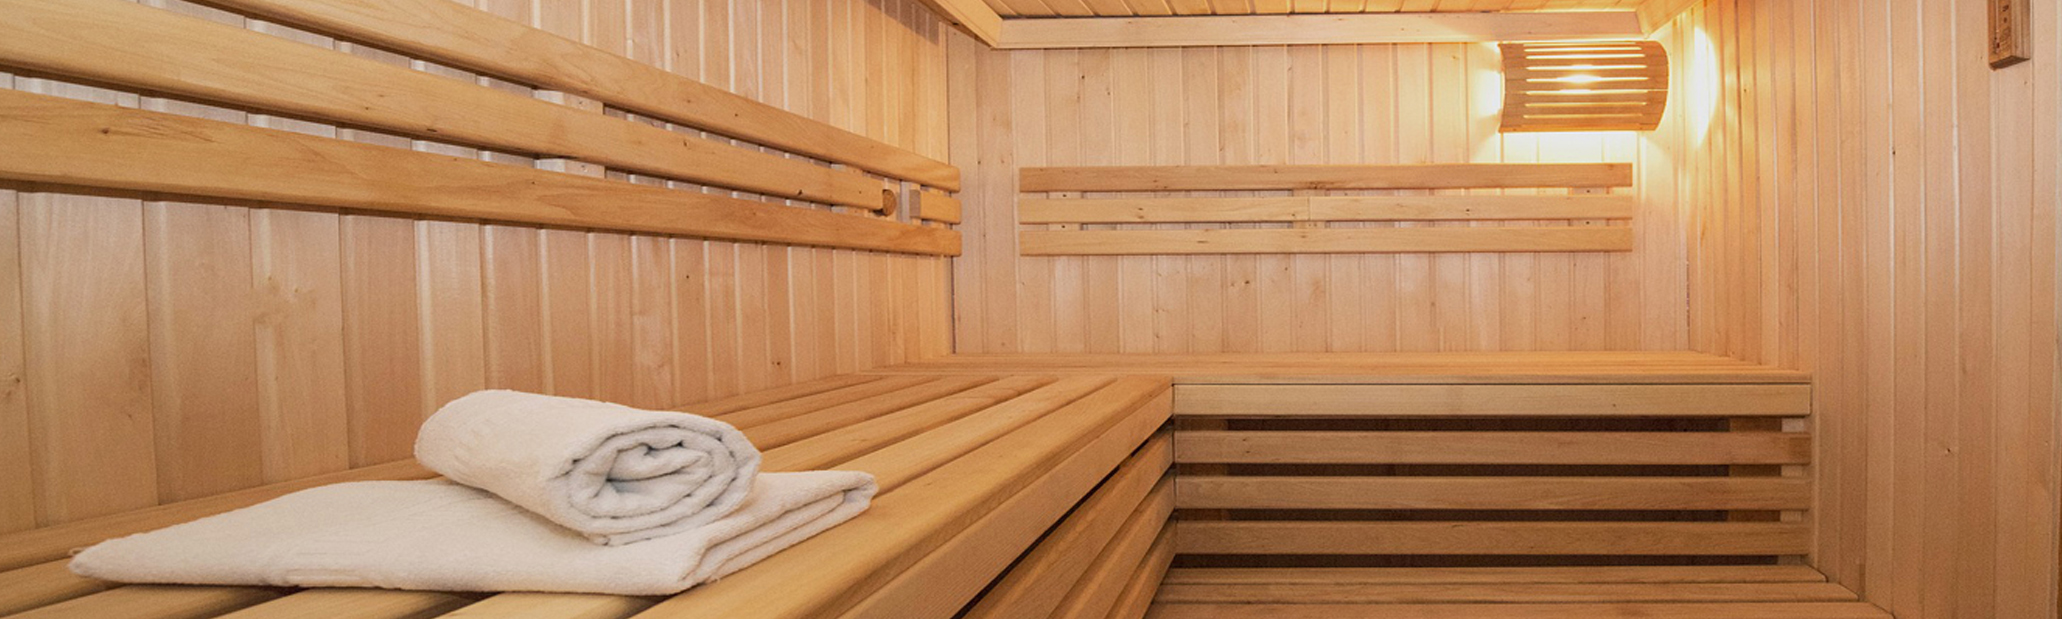 sauna and sunbeds at Fields Fitness